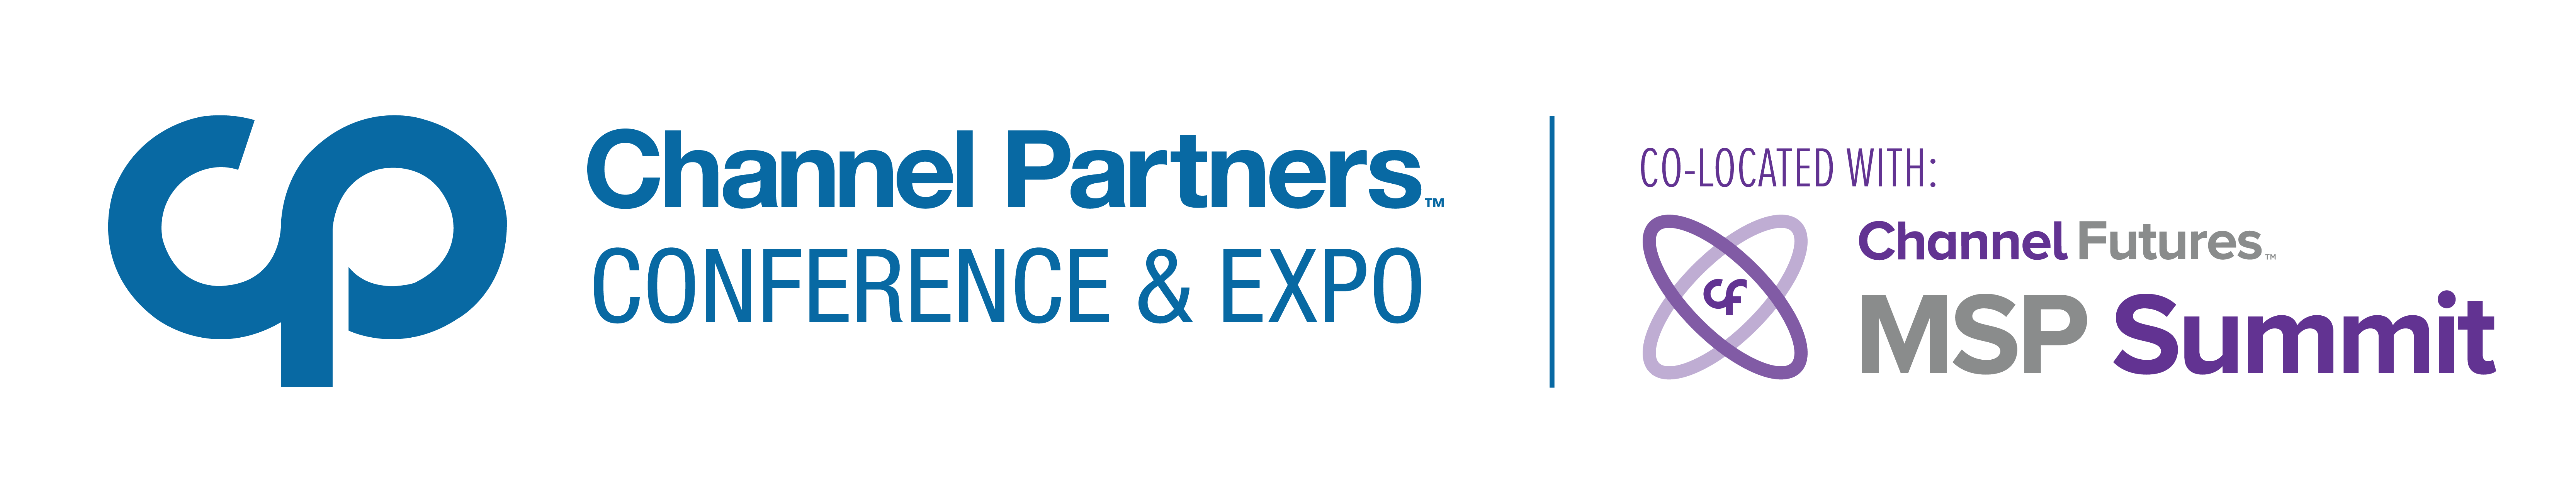 Channel Partners Conference & Expo co-located with Channel Futures MSP Summit